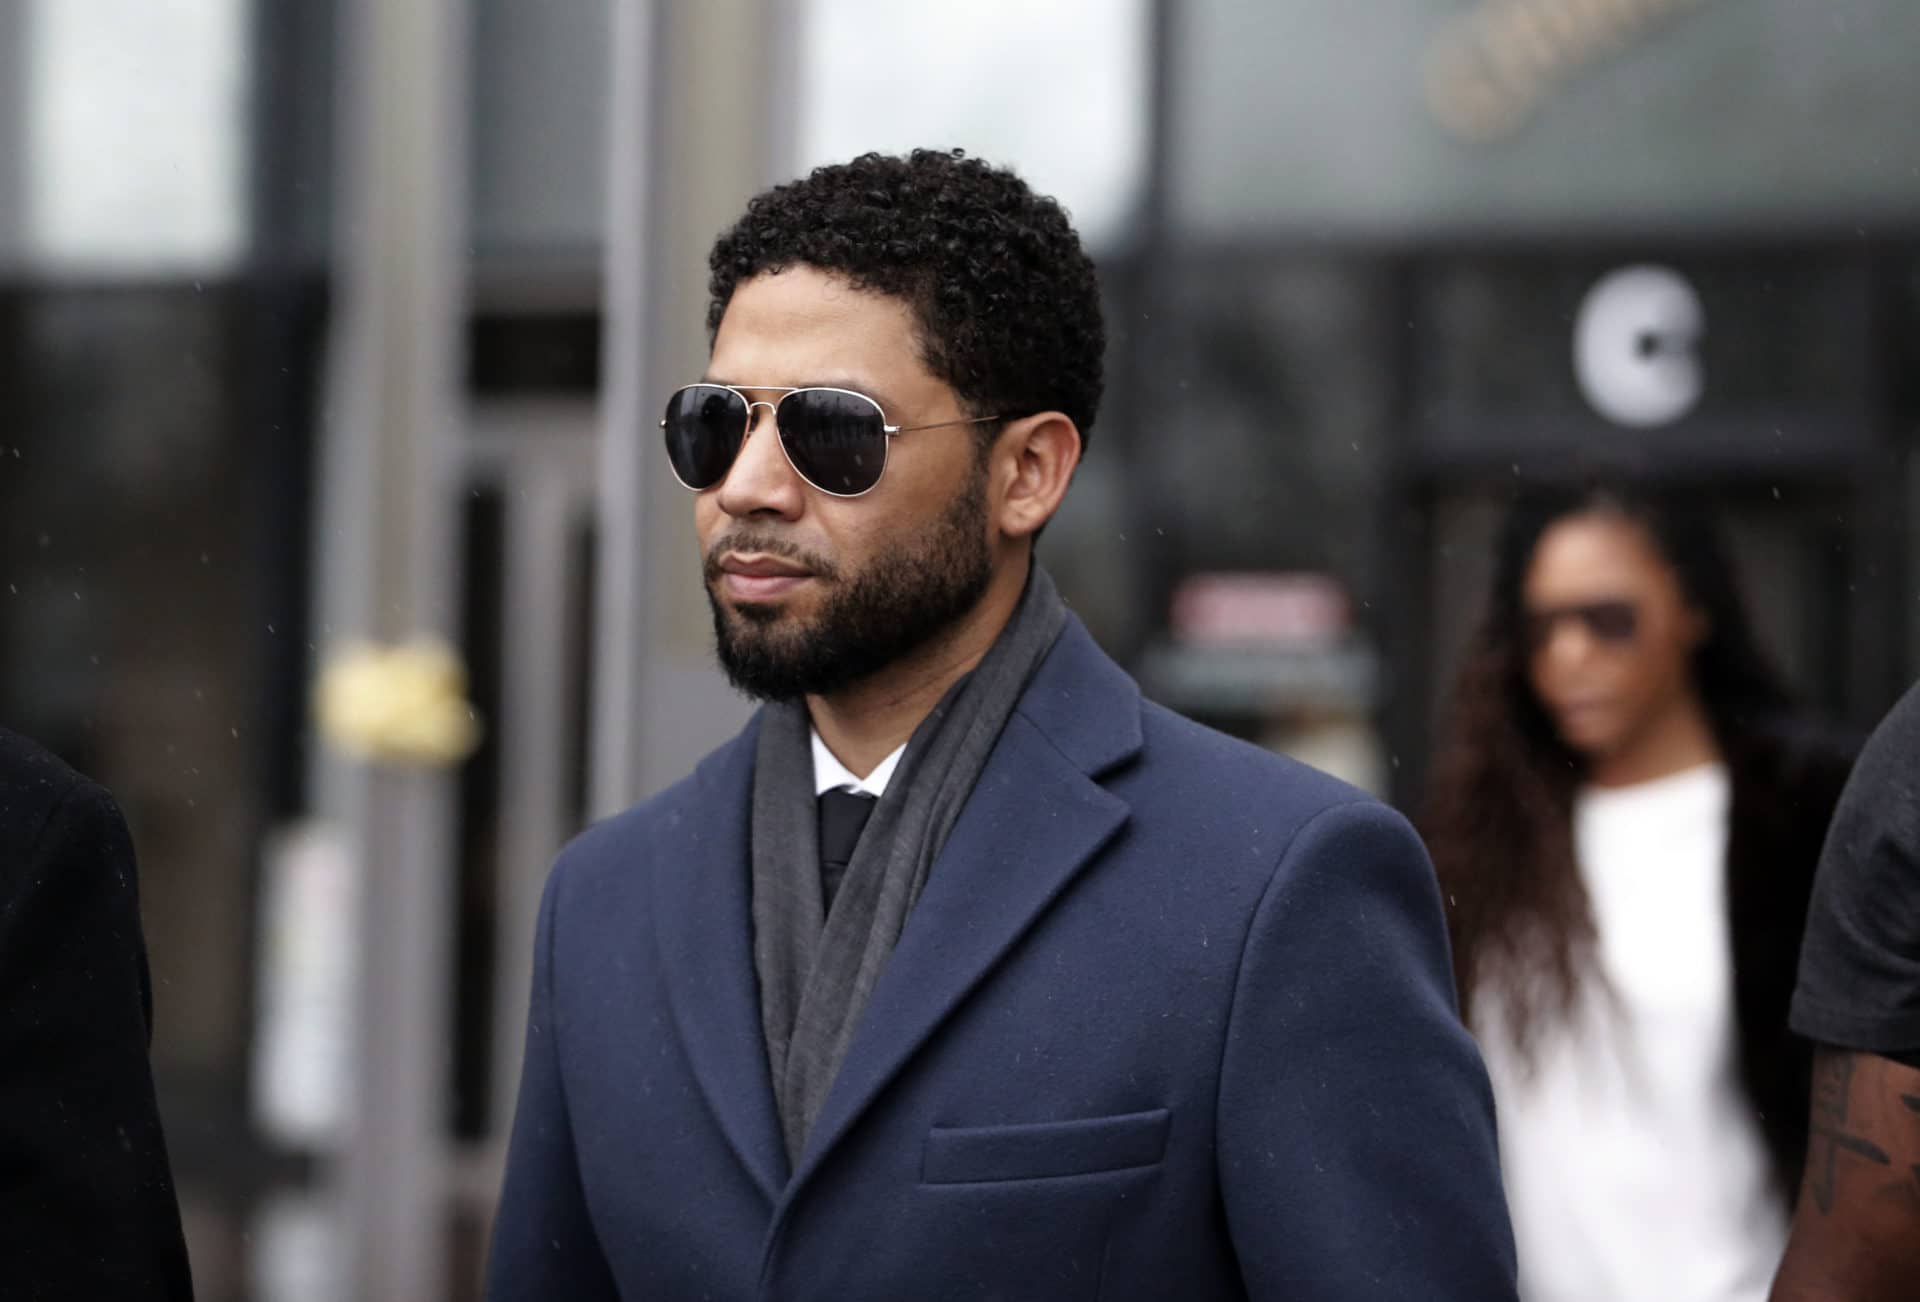 Jussie Smollett Speaks Out After Prosecutors Drop Charges